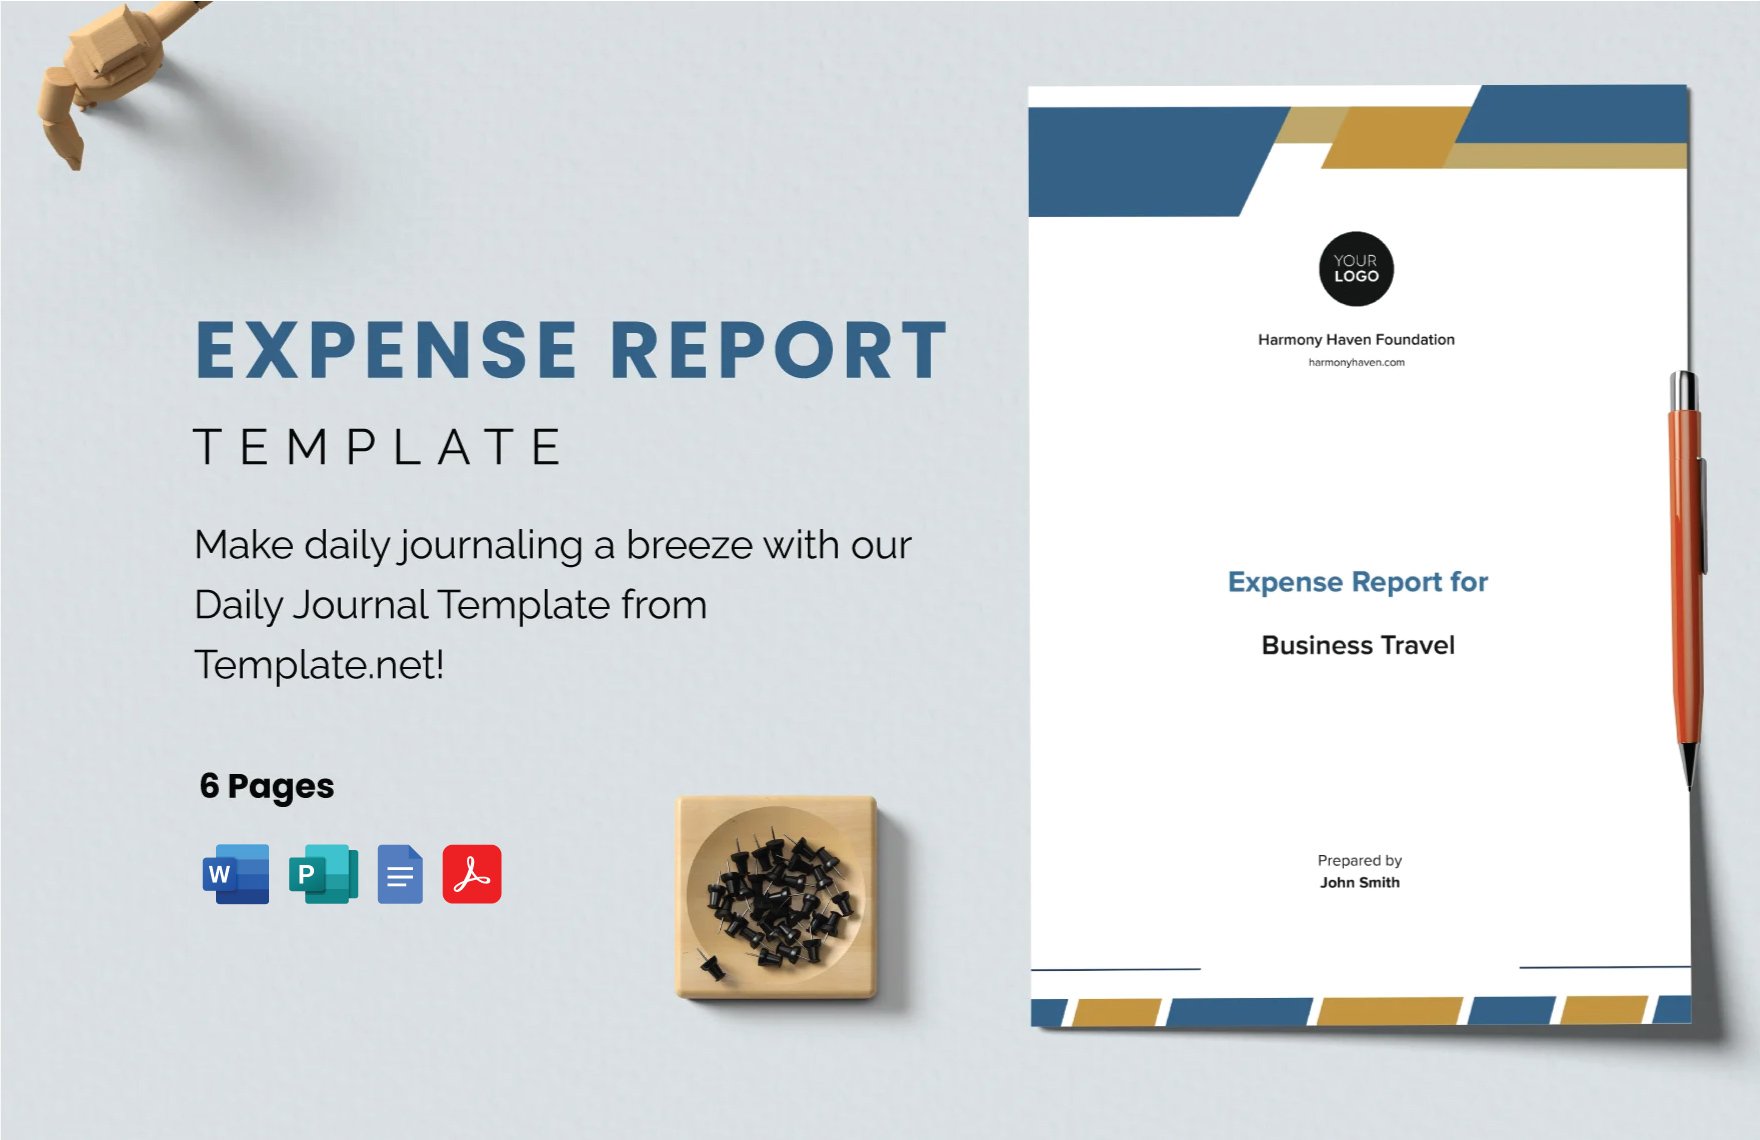 Expense Report Template in Word, Google Docs, PDF, Publisher